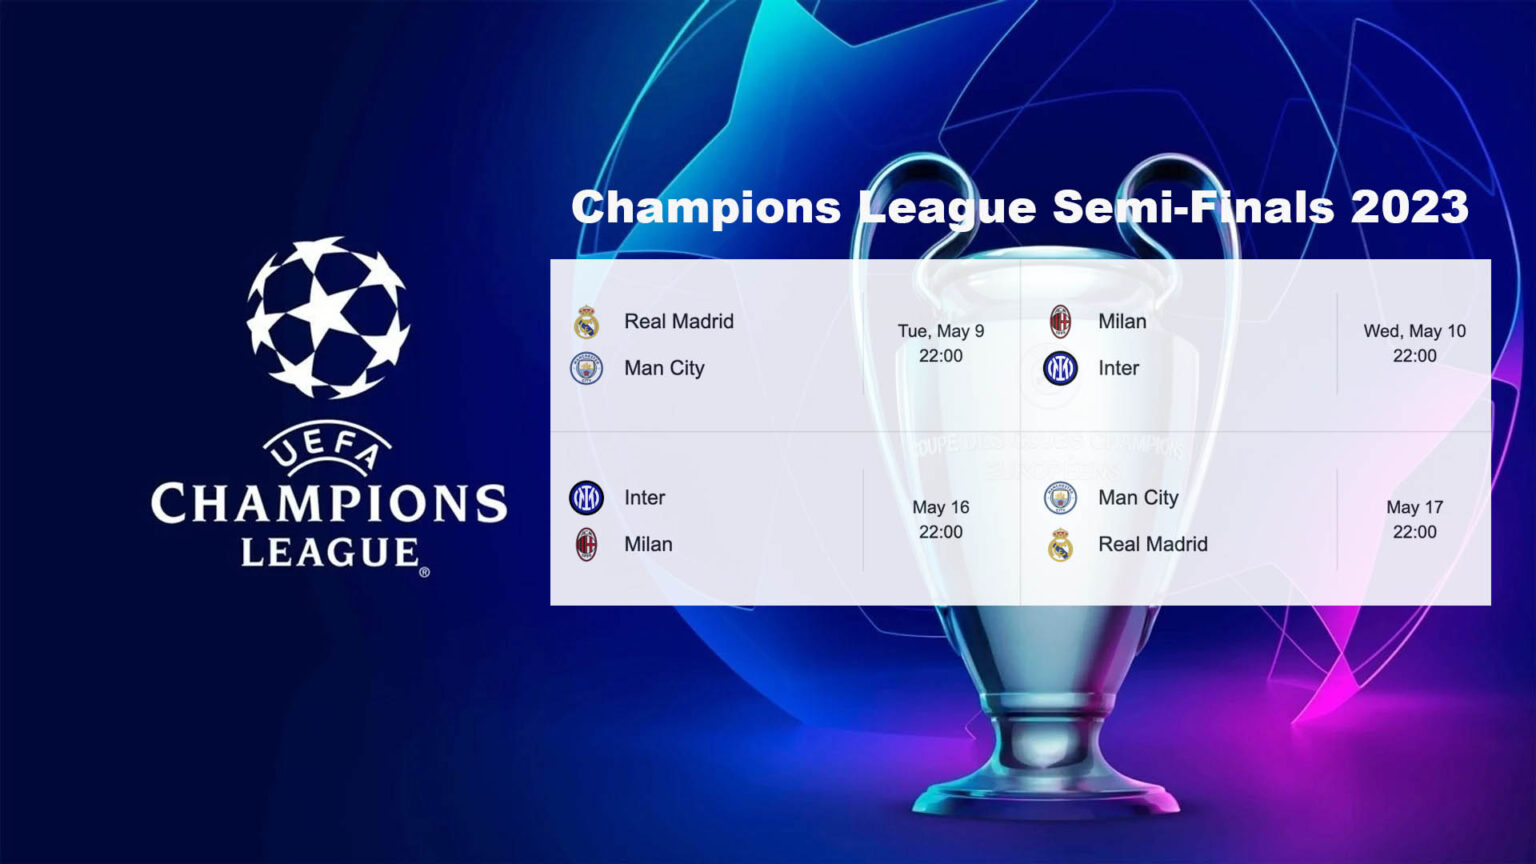 Champions League Semi Finals 2023 match schedule, date, time and teams involved